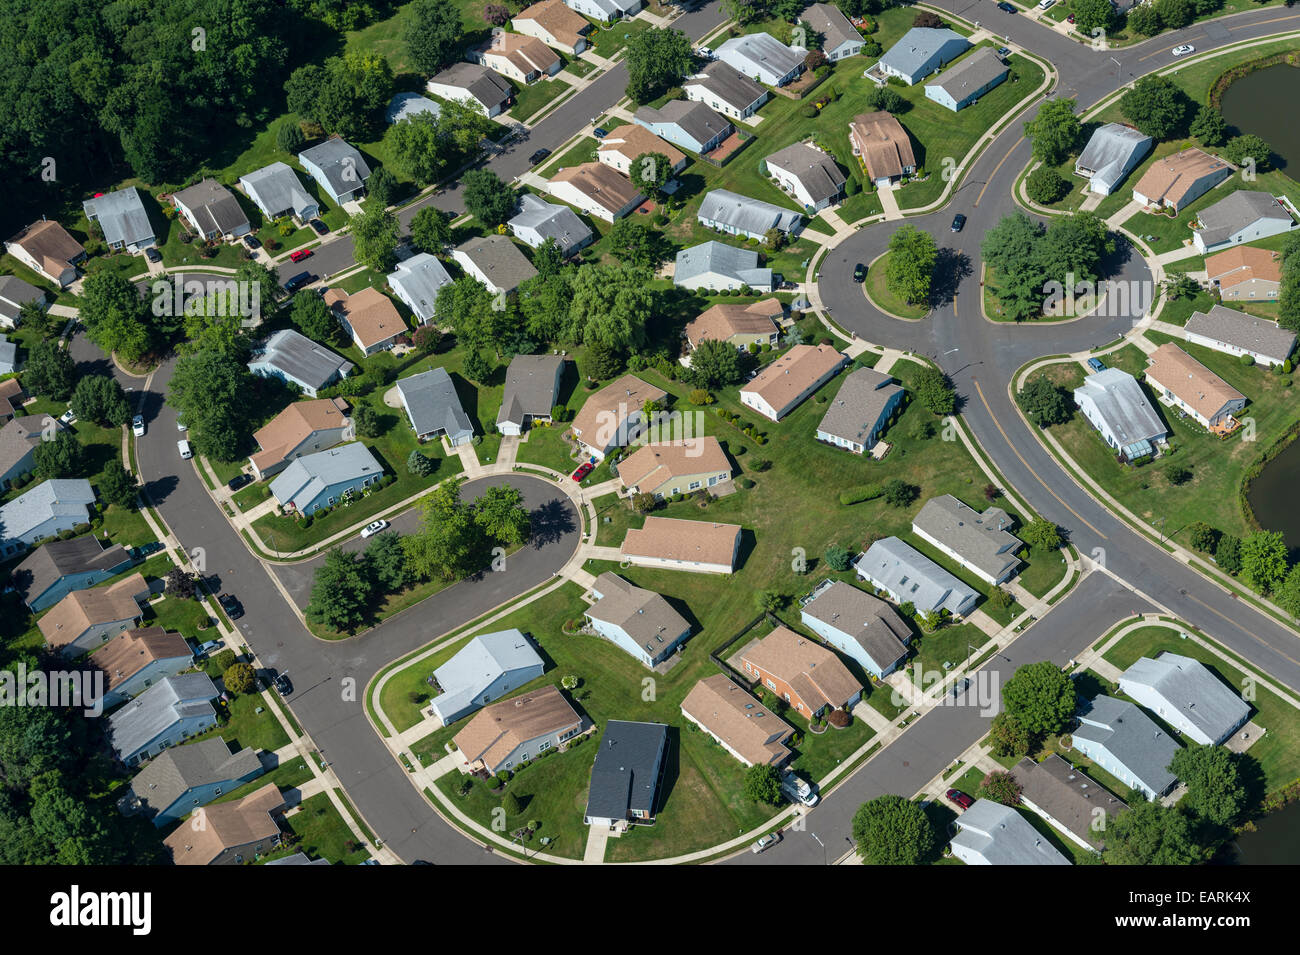 Aerial View Of Residential Houses In Suburban Neighborhood, New Jersey, USA Stock Photo